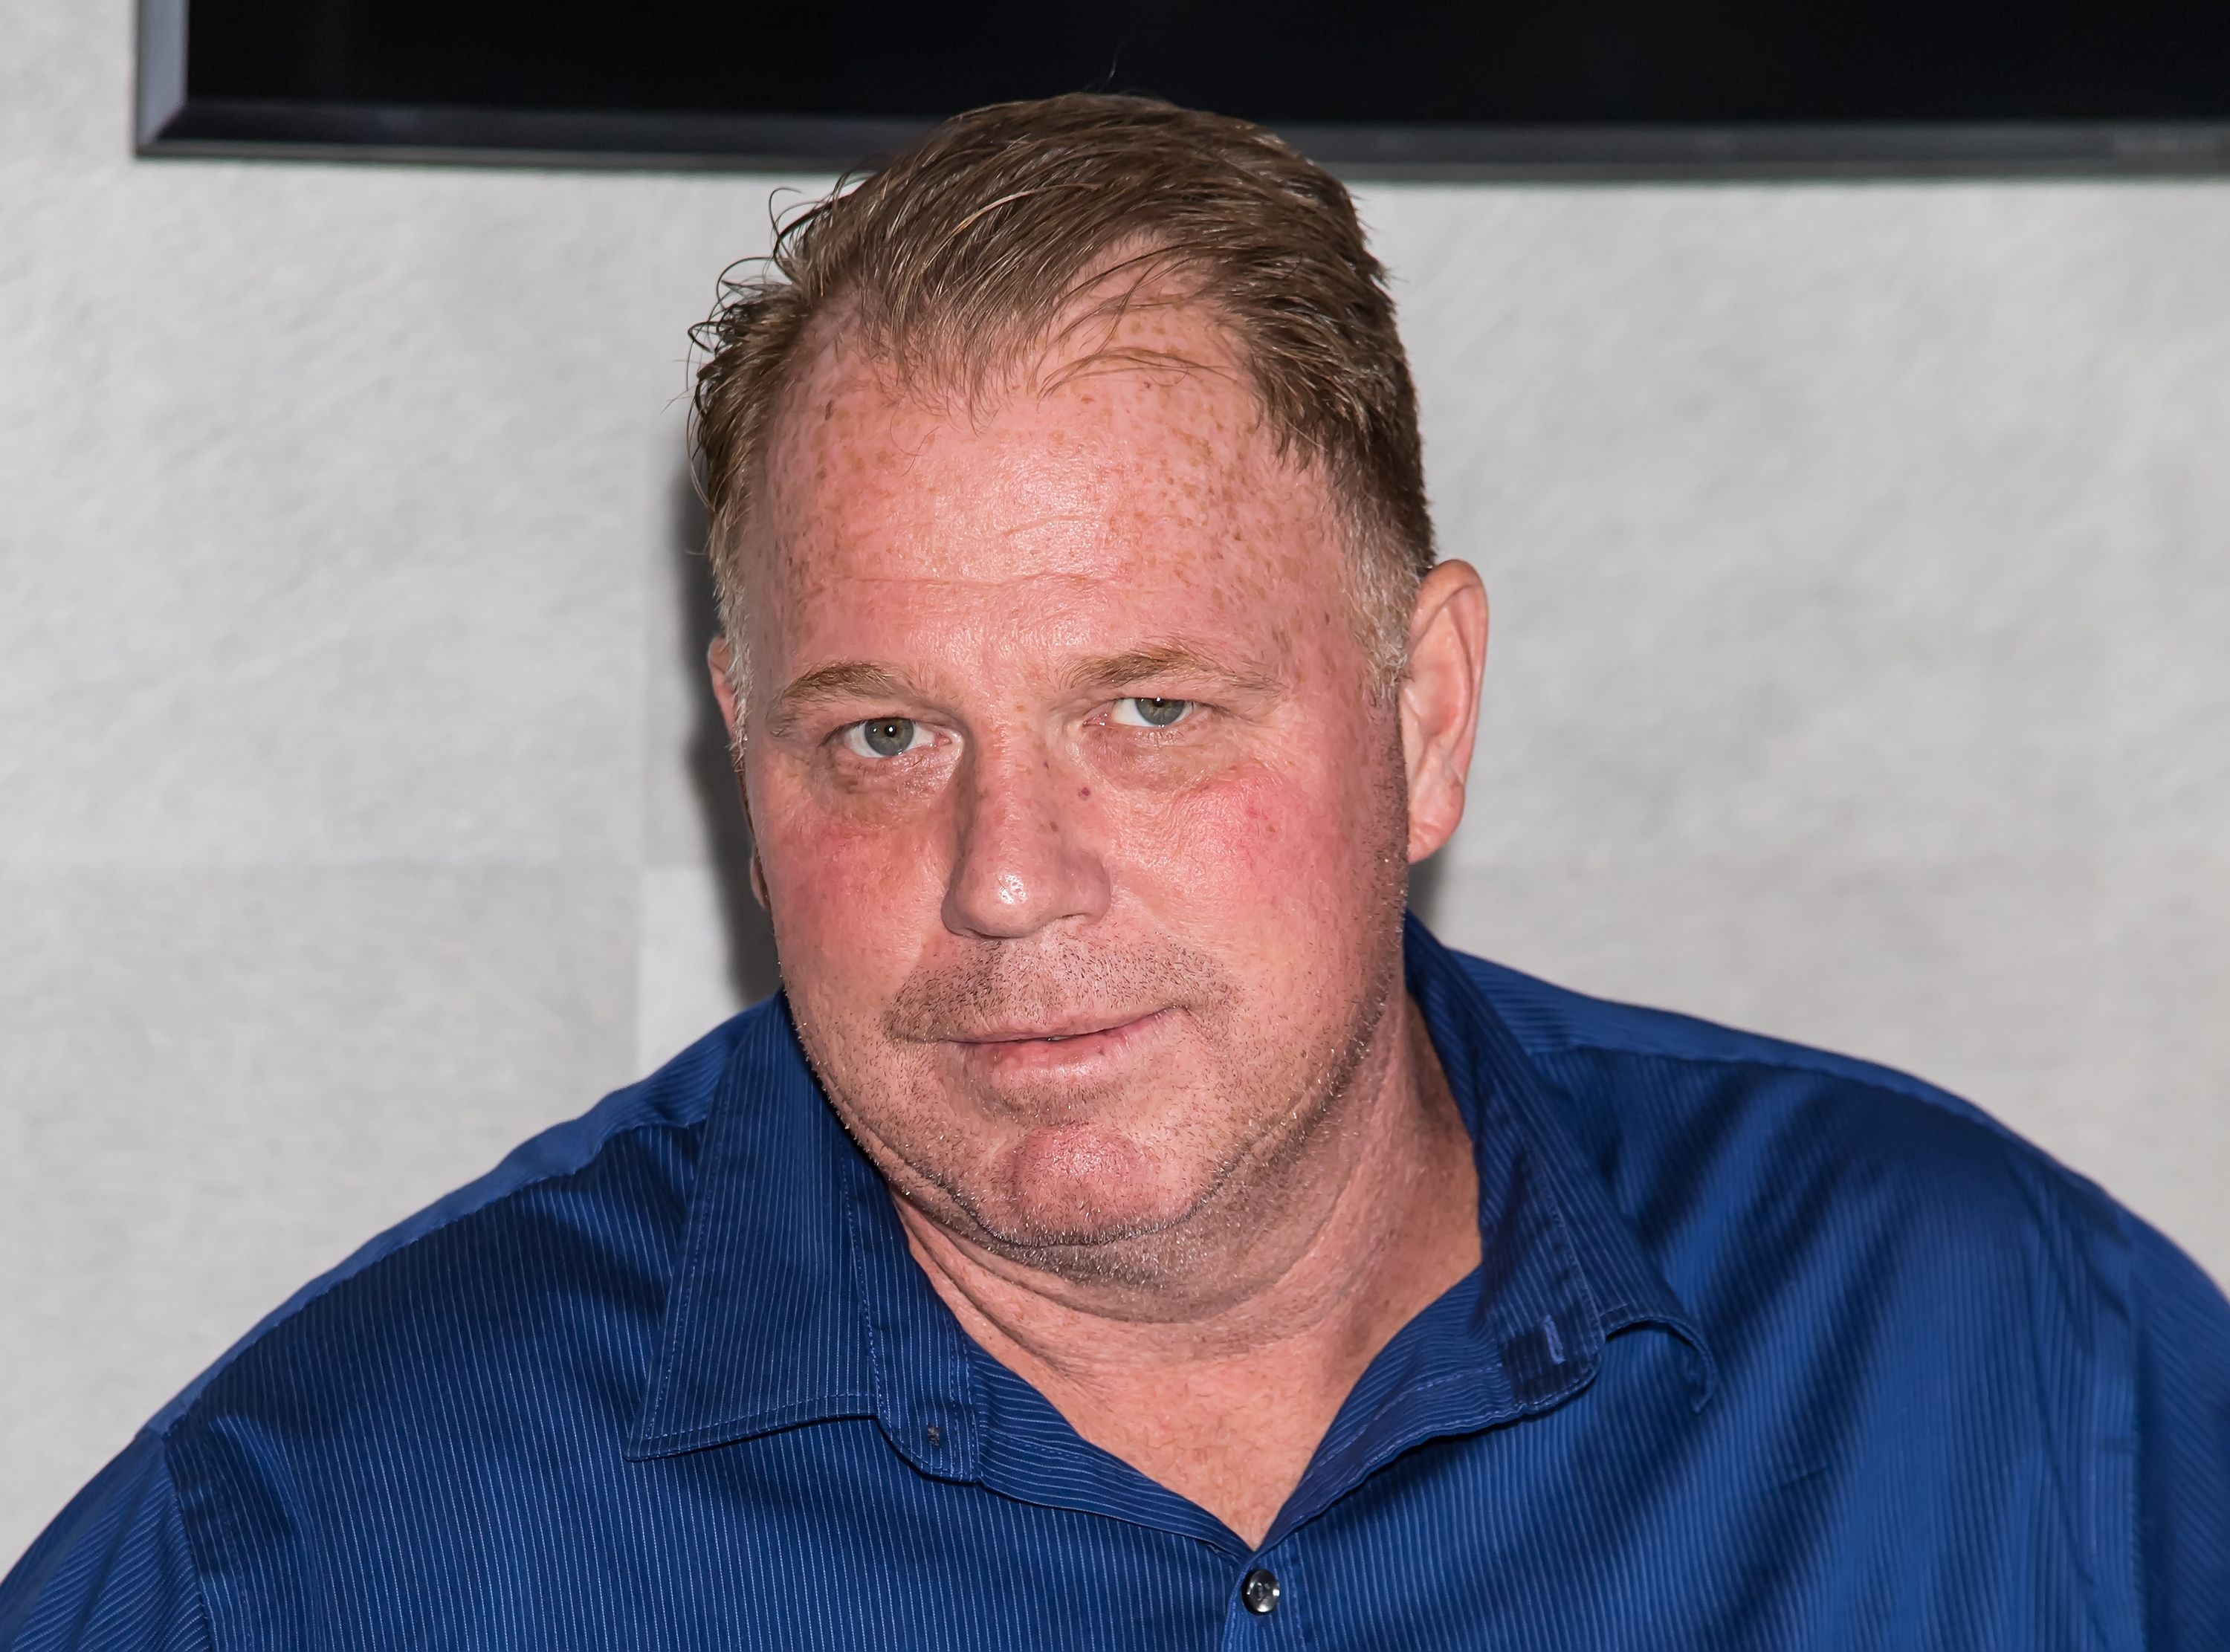 Thomas Markle Jr. at the Rocco's Collision Presents Celebrity Boxing 68 Press Conference on May 15, 2019, in Philadelphia, Pennsylvania. | Source: Gilbert Carrasquillo/Getty Images